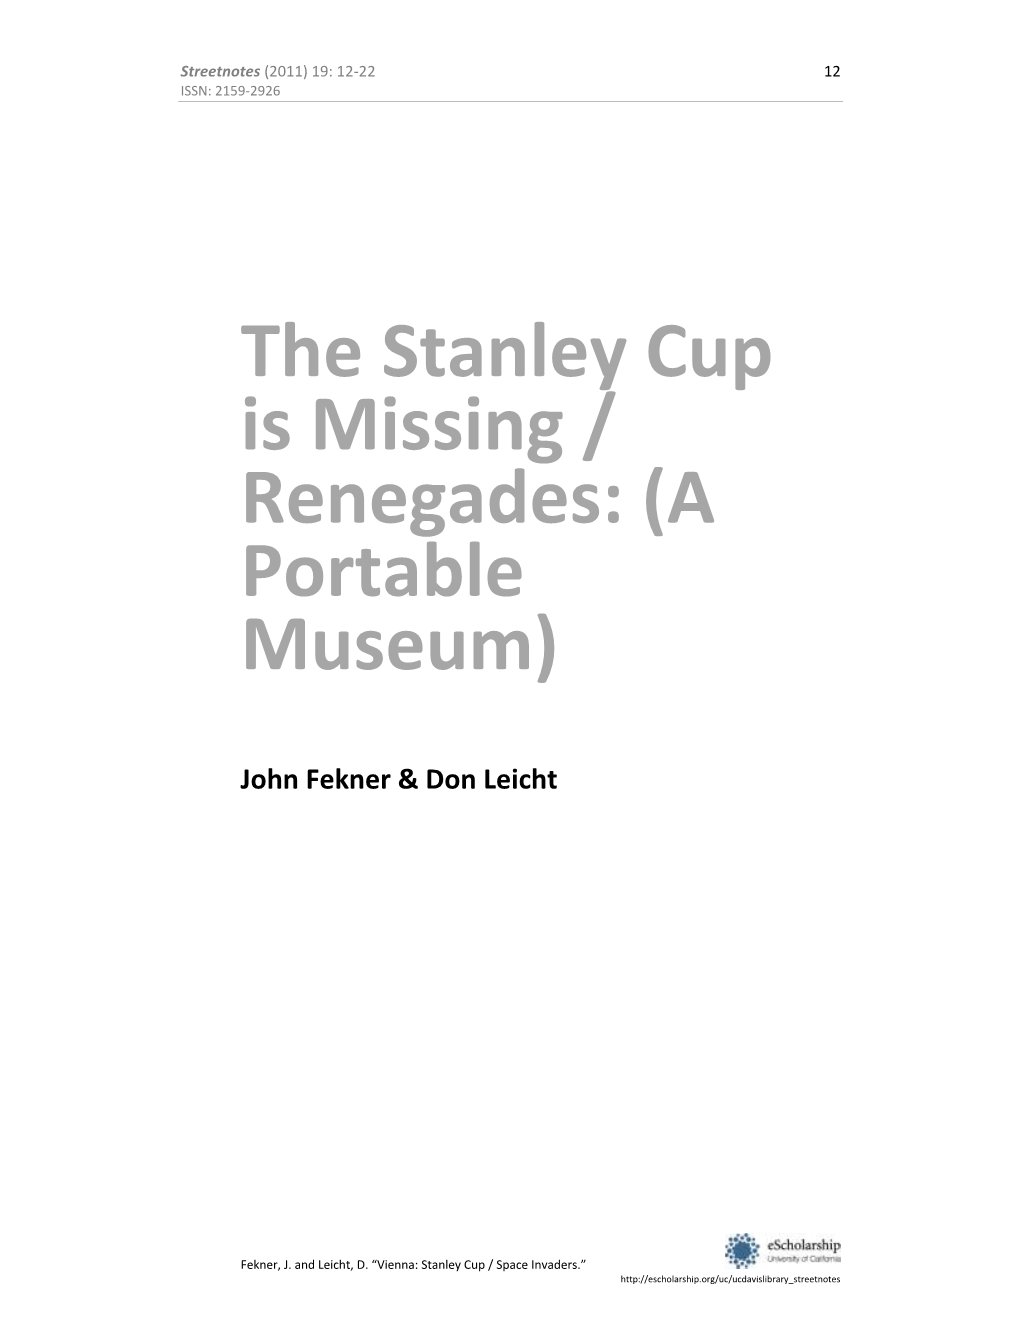 The Stanley Cup Is Missing / Renegades: (A Portable Museum)